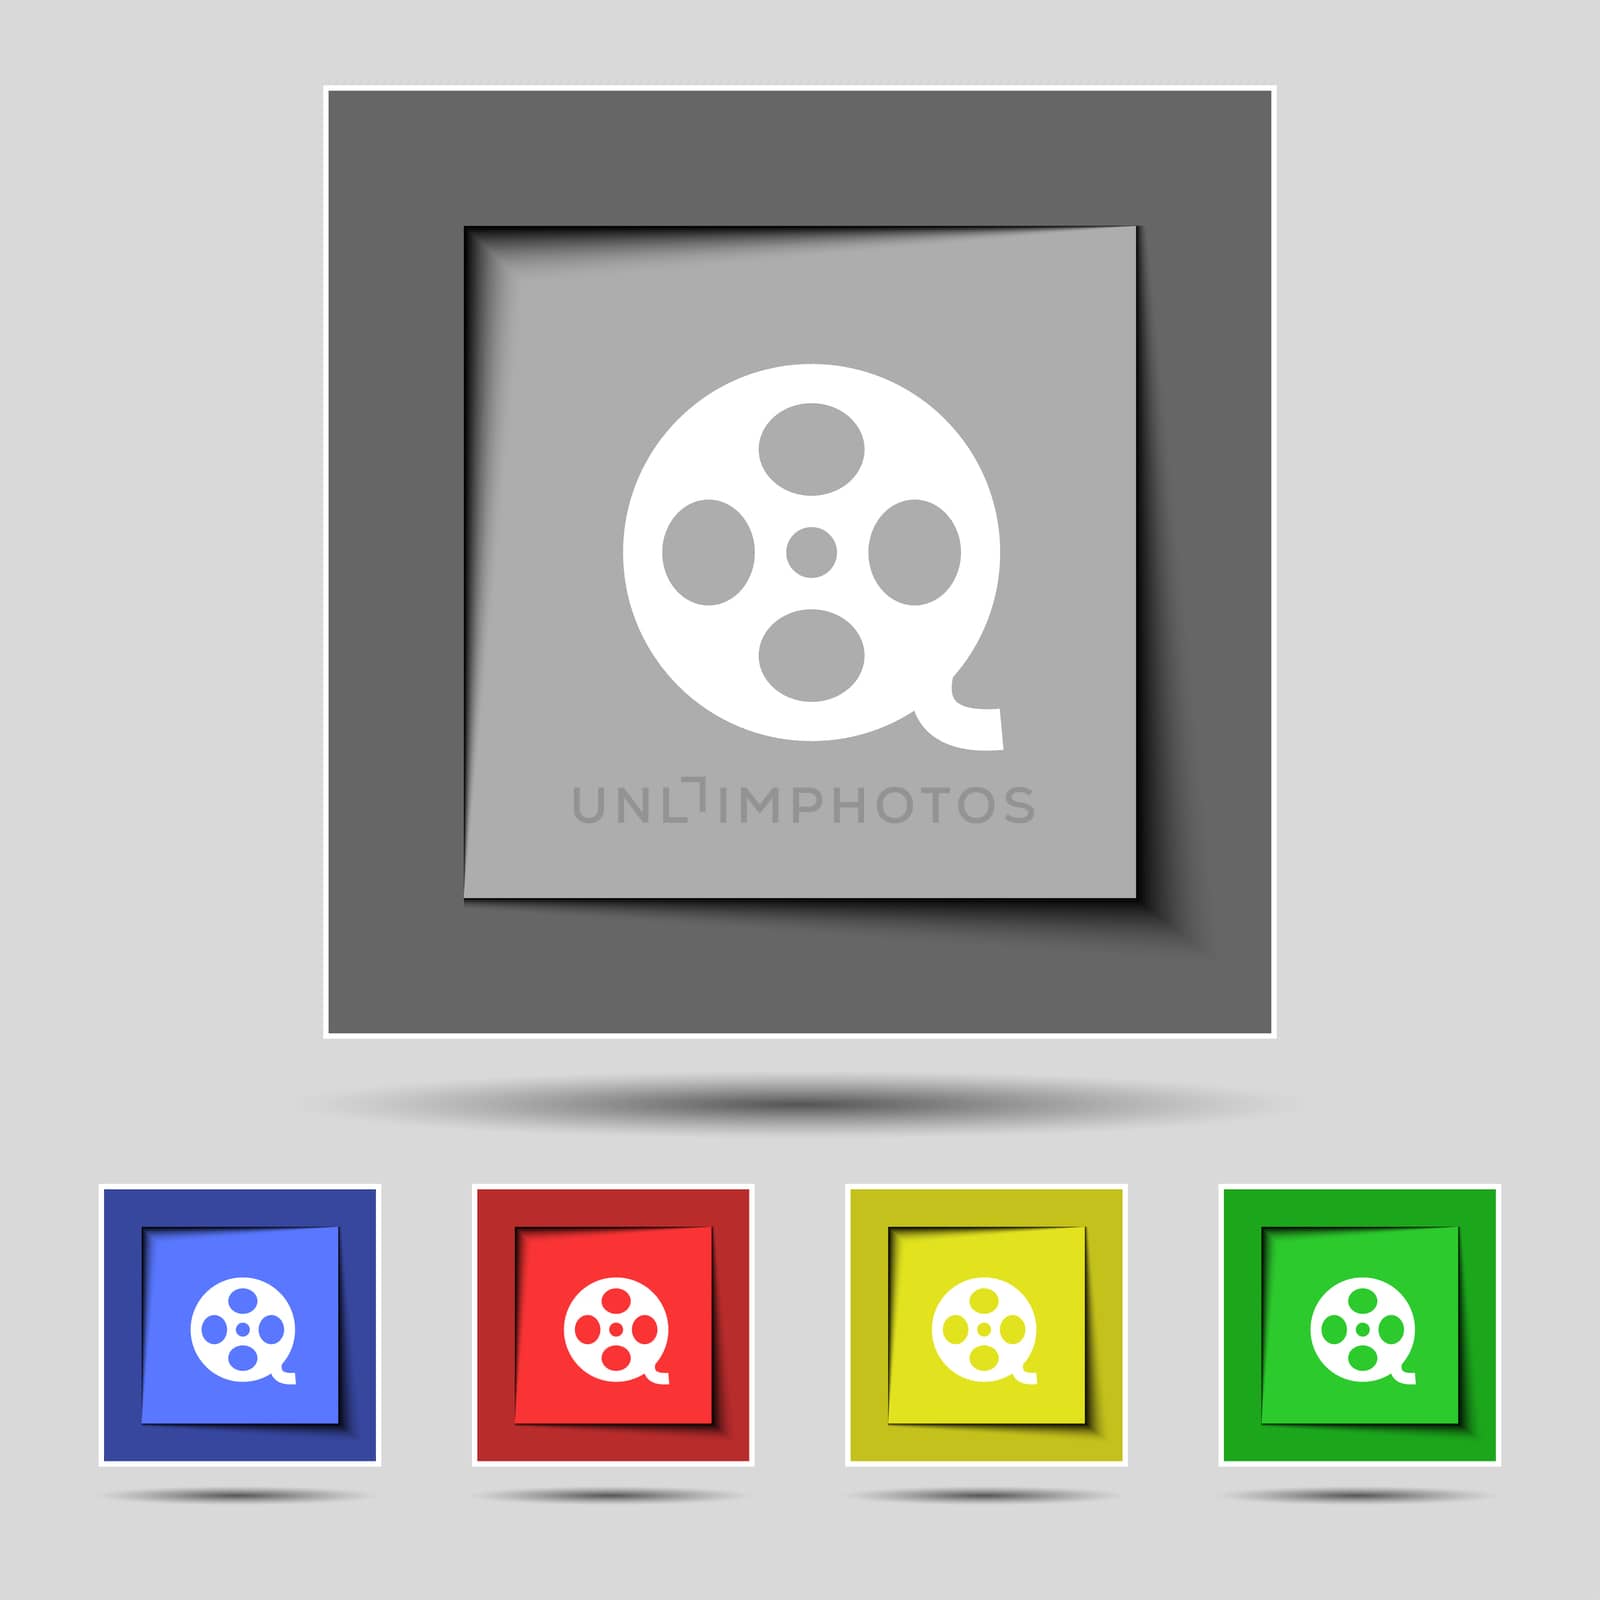 Video sign icon. Video frame symbol. Set colourful buttons. illustration